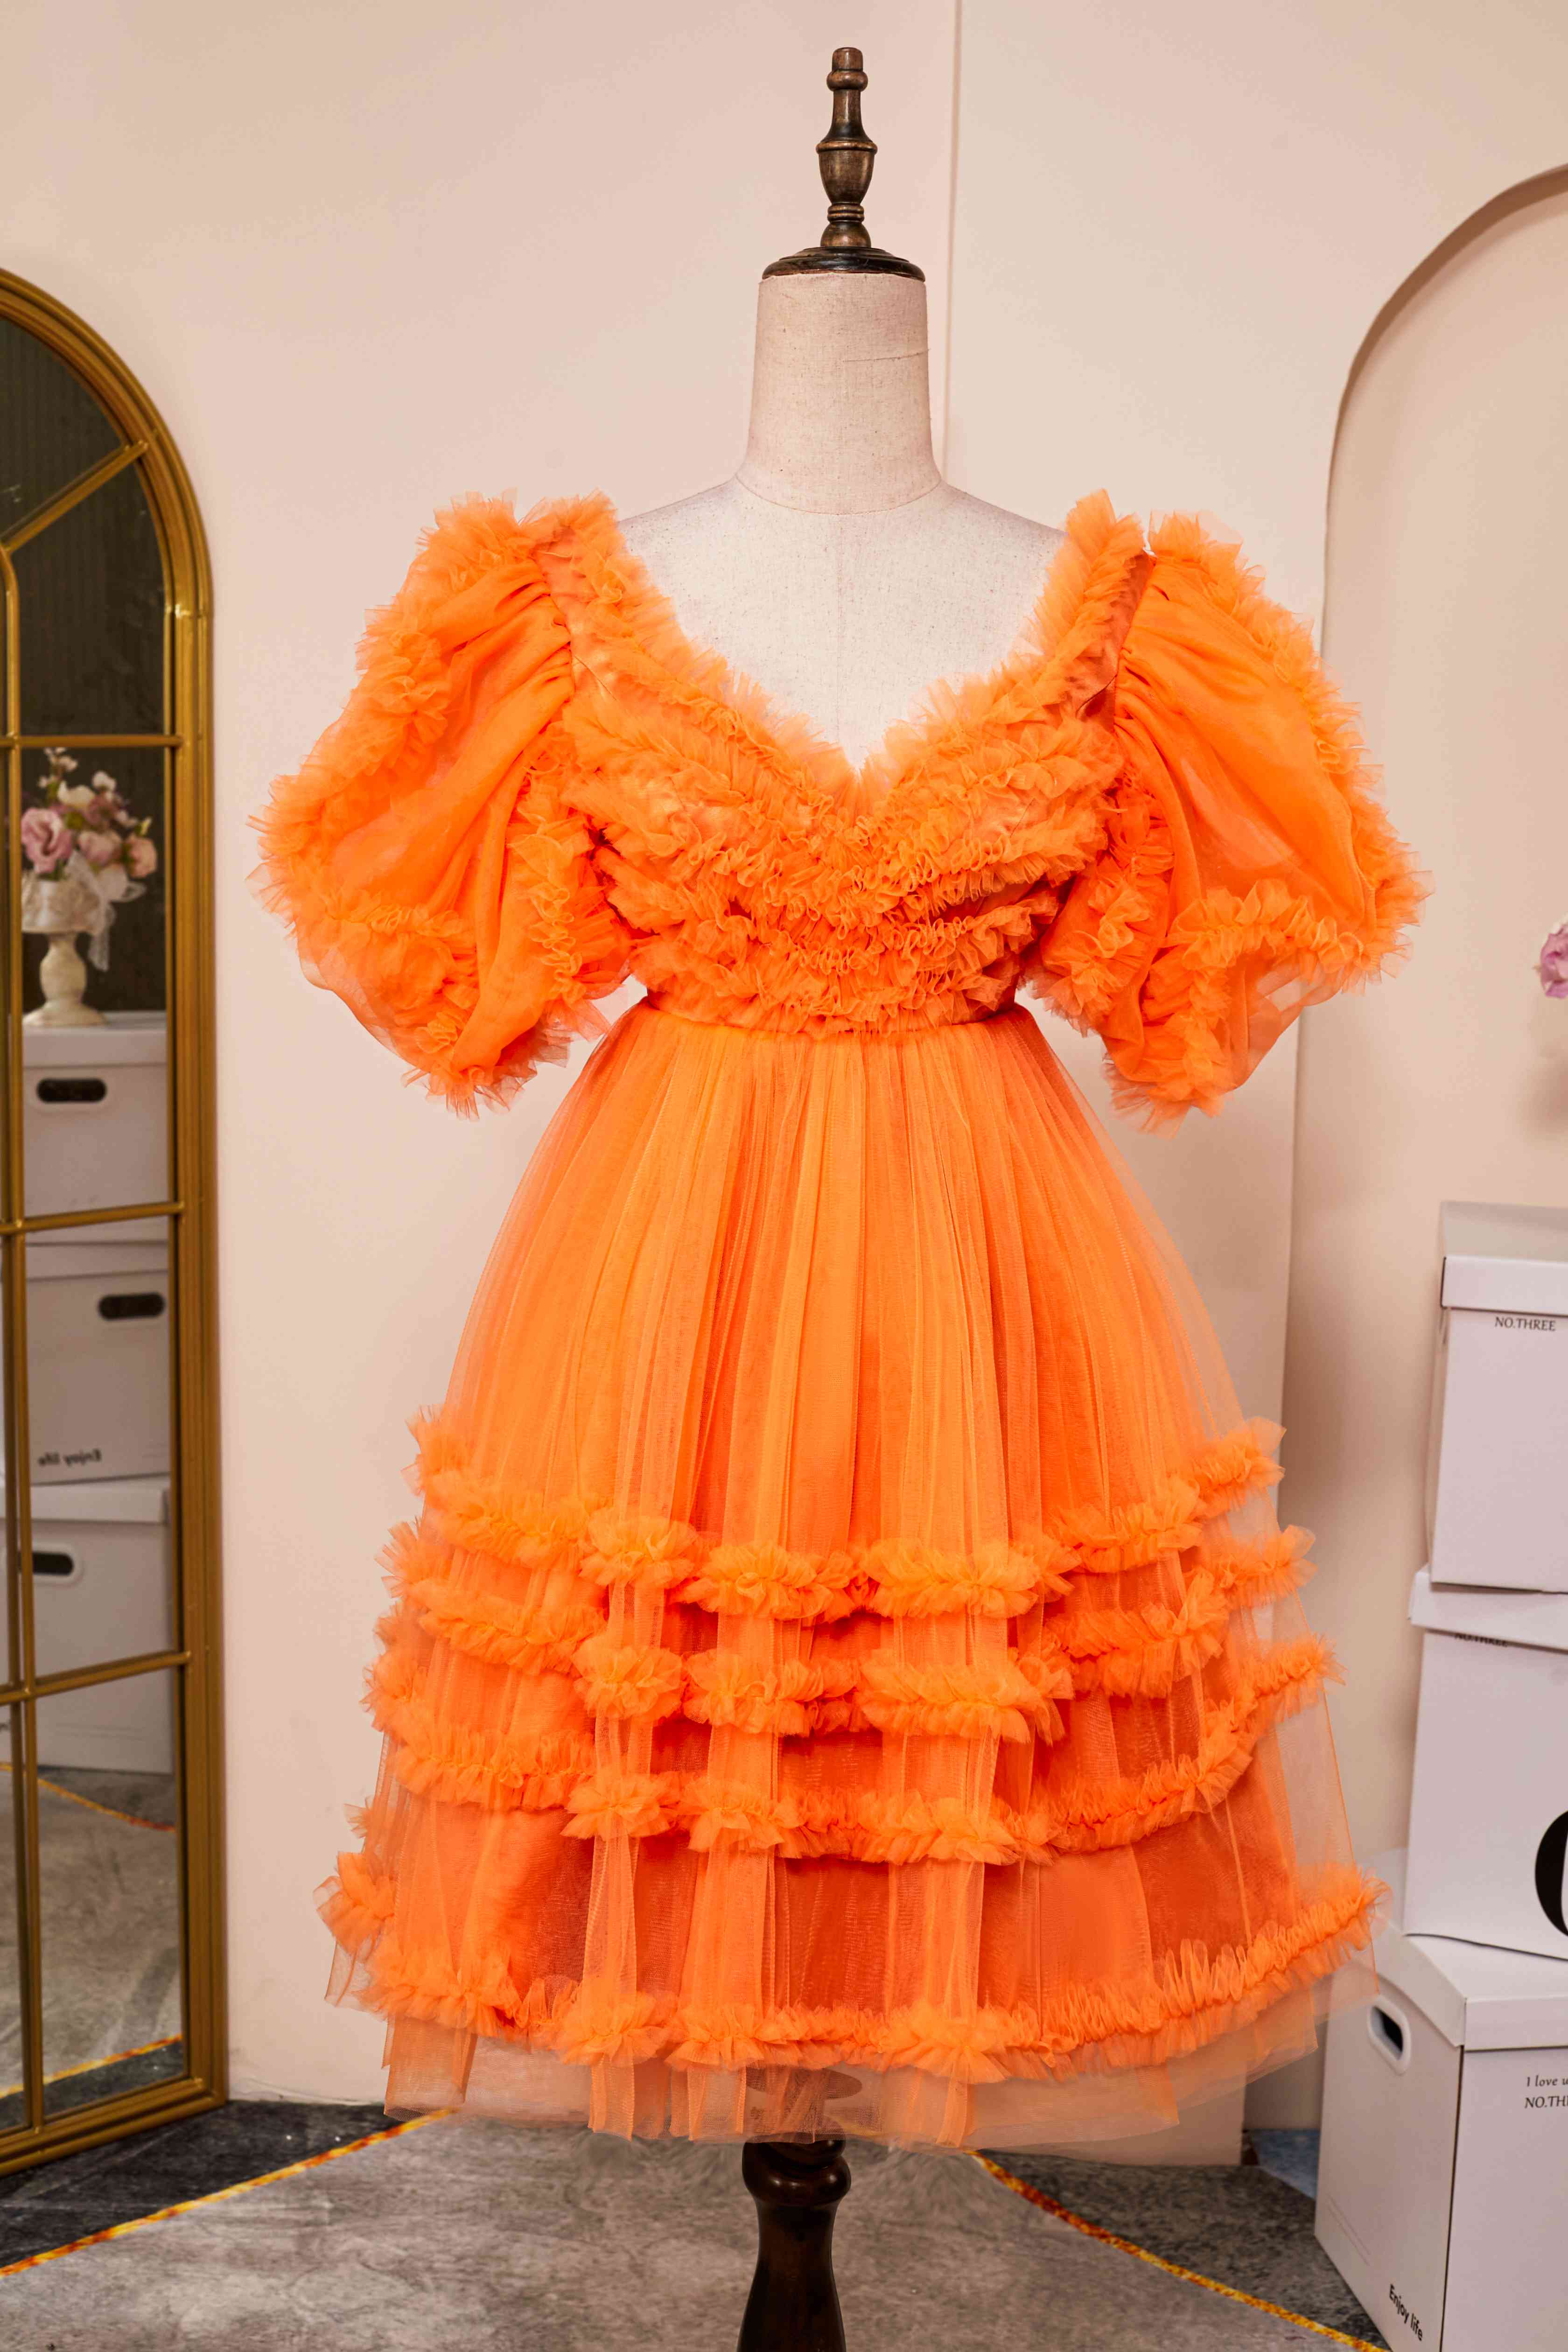 Bridesmaids Dresses Different Styles, V-Neck Orange Ruffled Short Homecoming Dress with Puff Sleeves